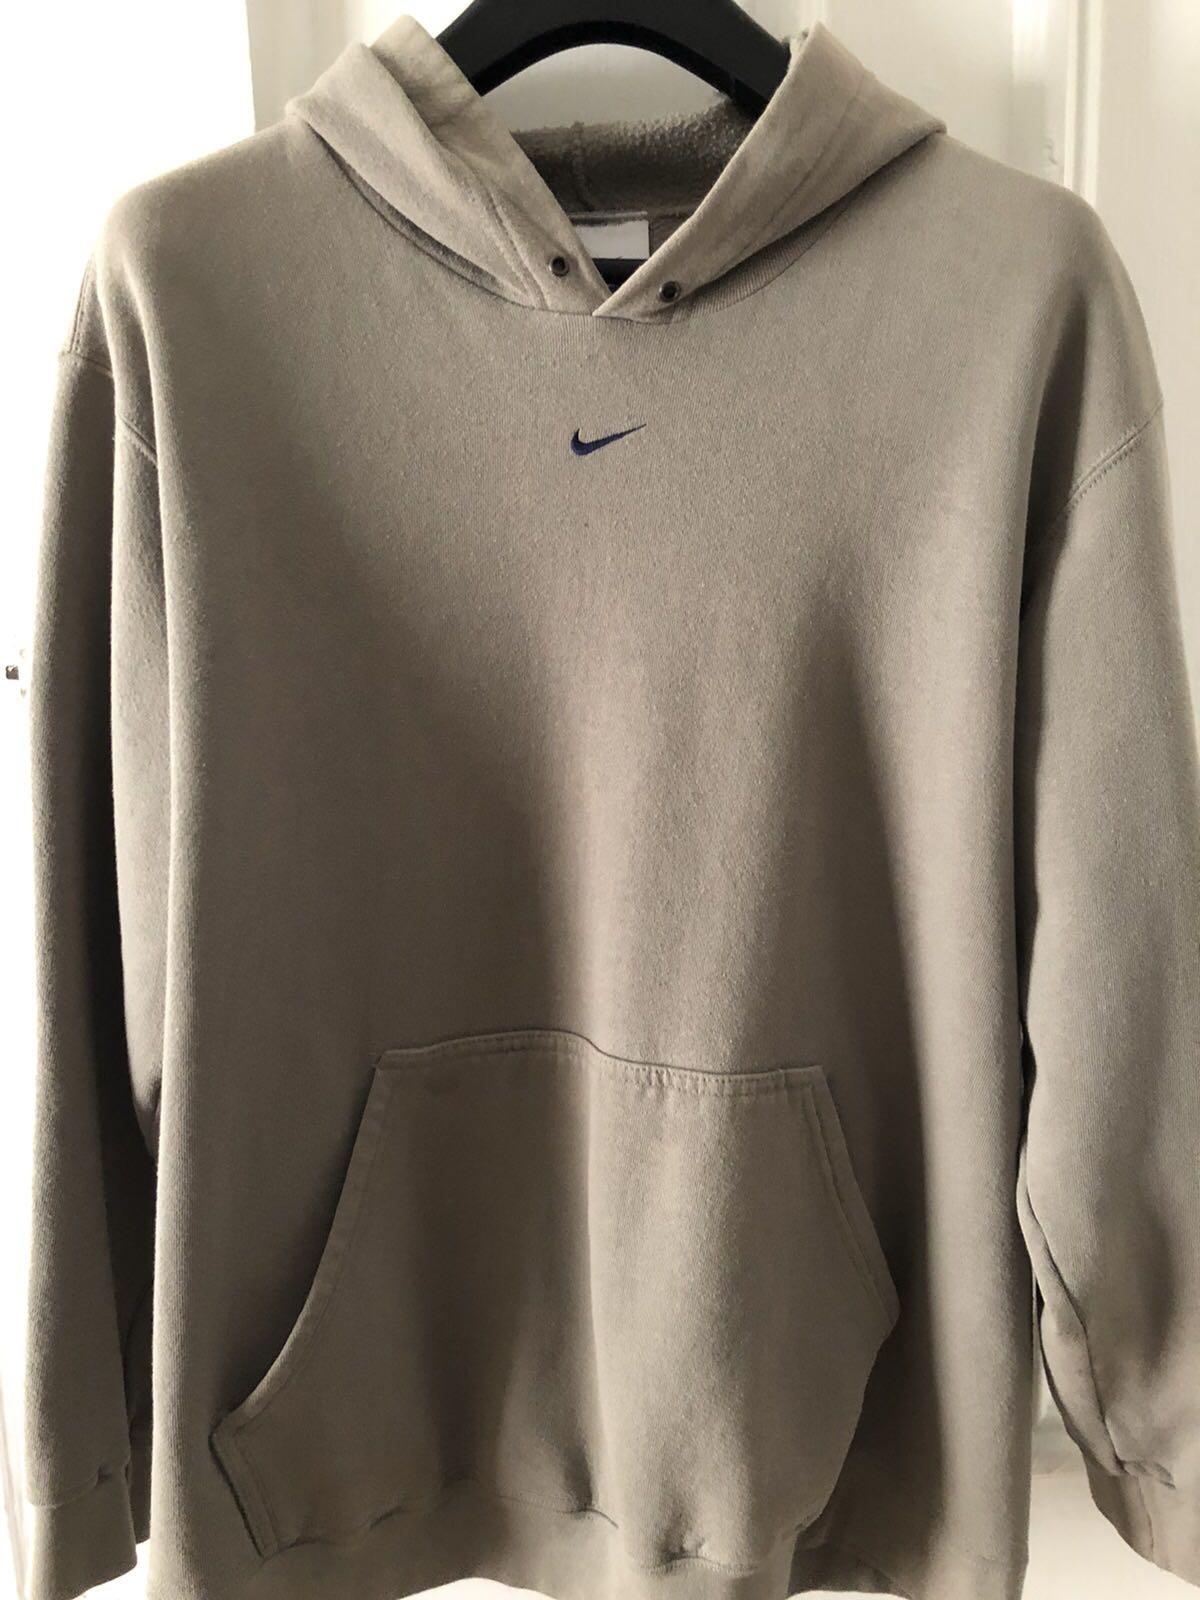 nike hoodie with swoosh in middle